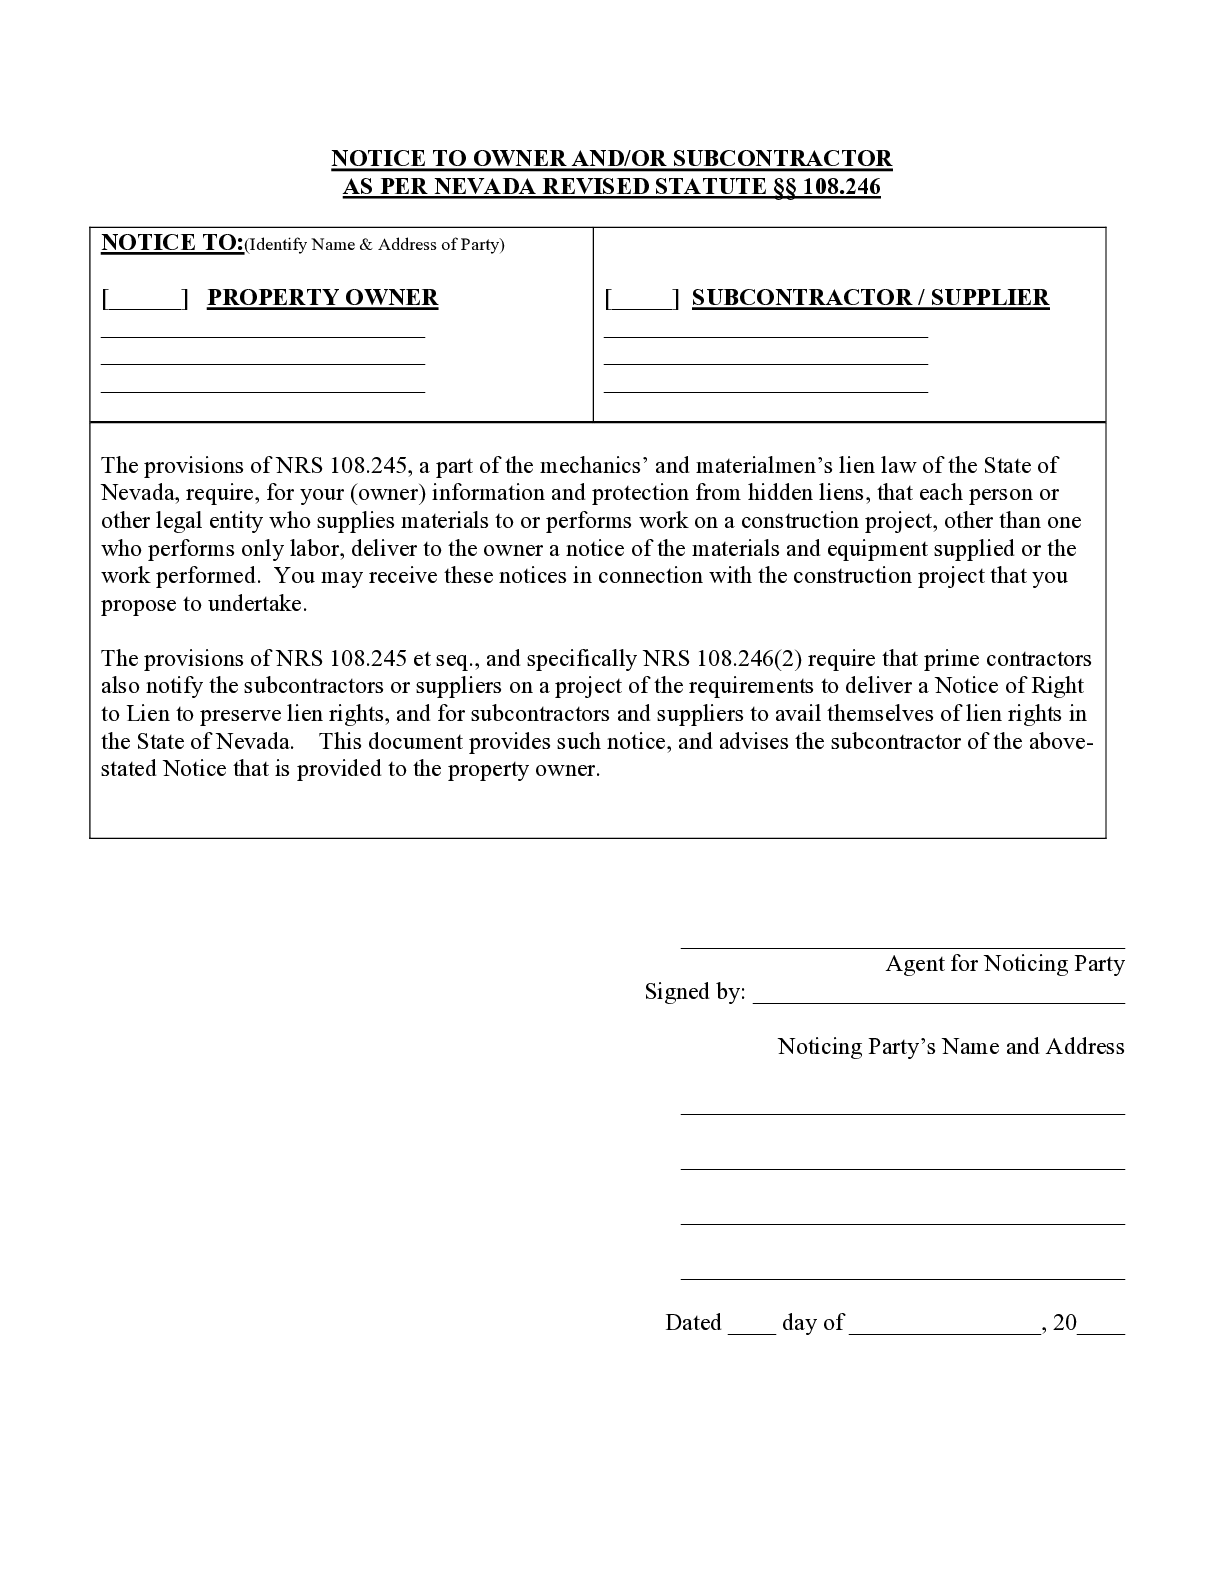 Nevada GC’s Notice to Owner/Subcontractors Form